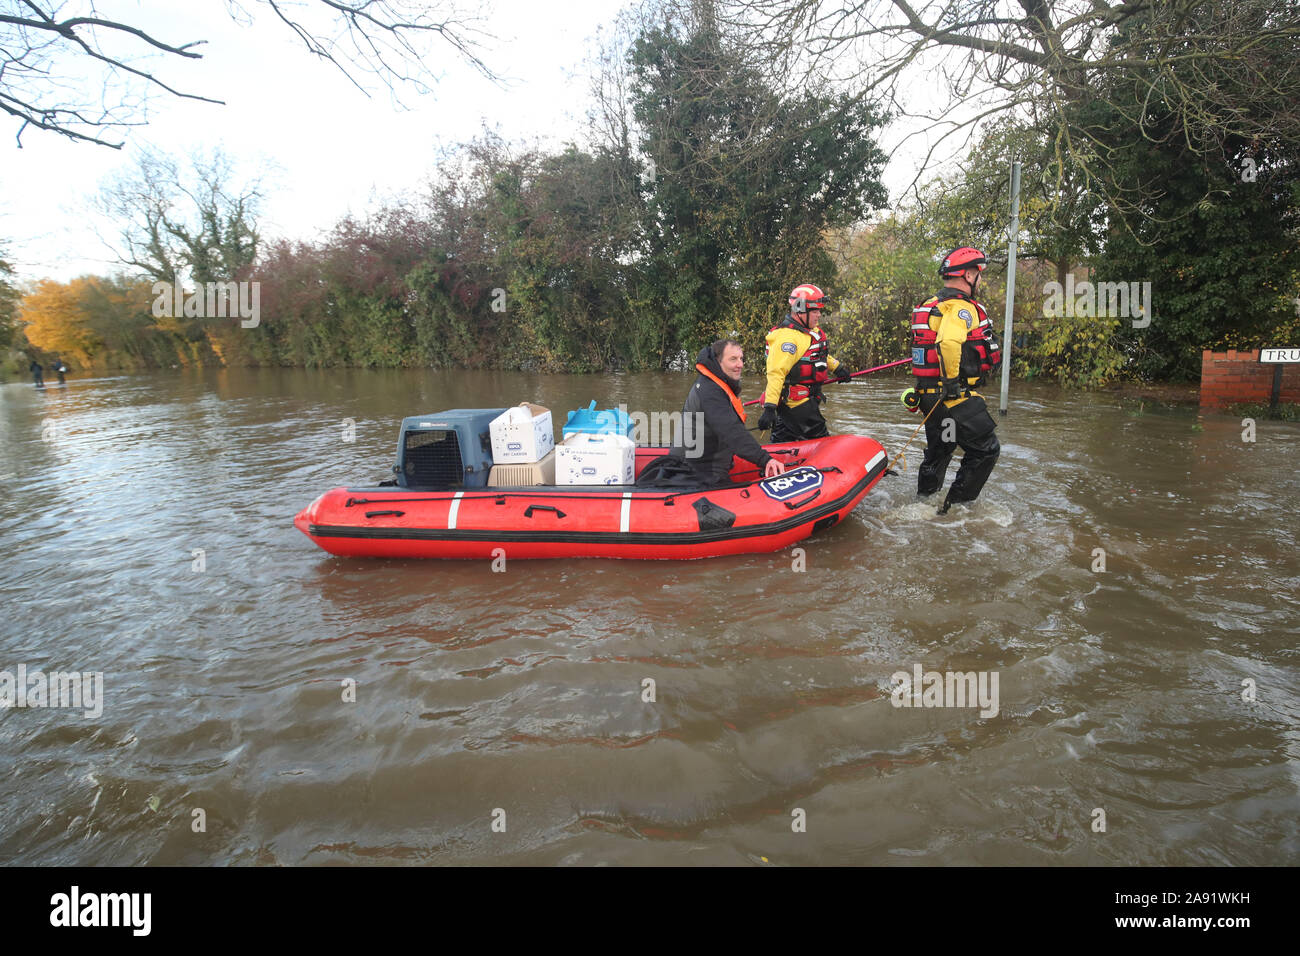 Rescuers pull a boat through floodwater in Fishlake, Doncaster. The Prime Minister is set to chair a meeting of the Government's emergency committee after severe flooding in parts of the country, where rain is finally expected to ease this afternoon. Stock Photo